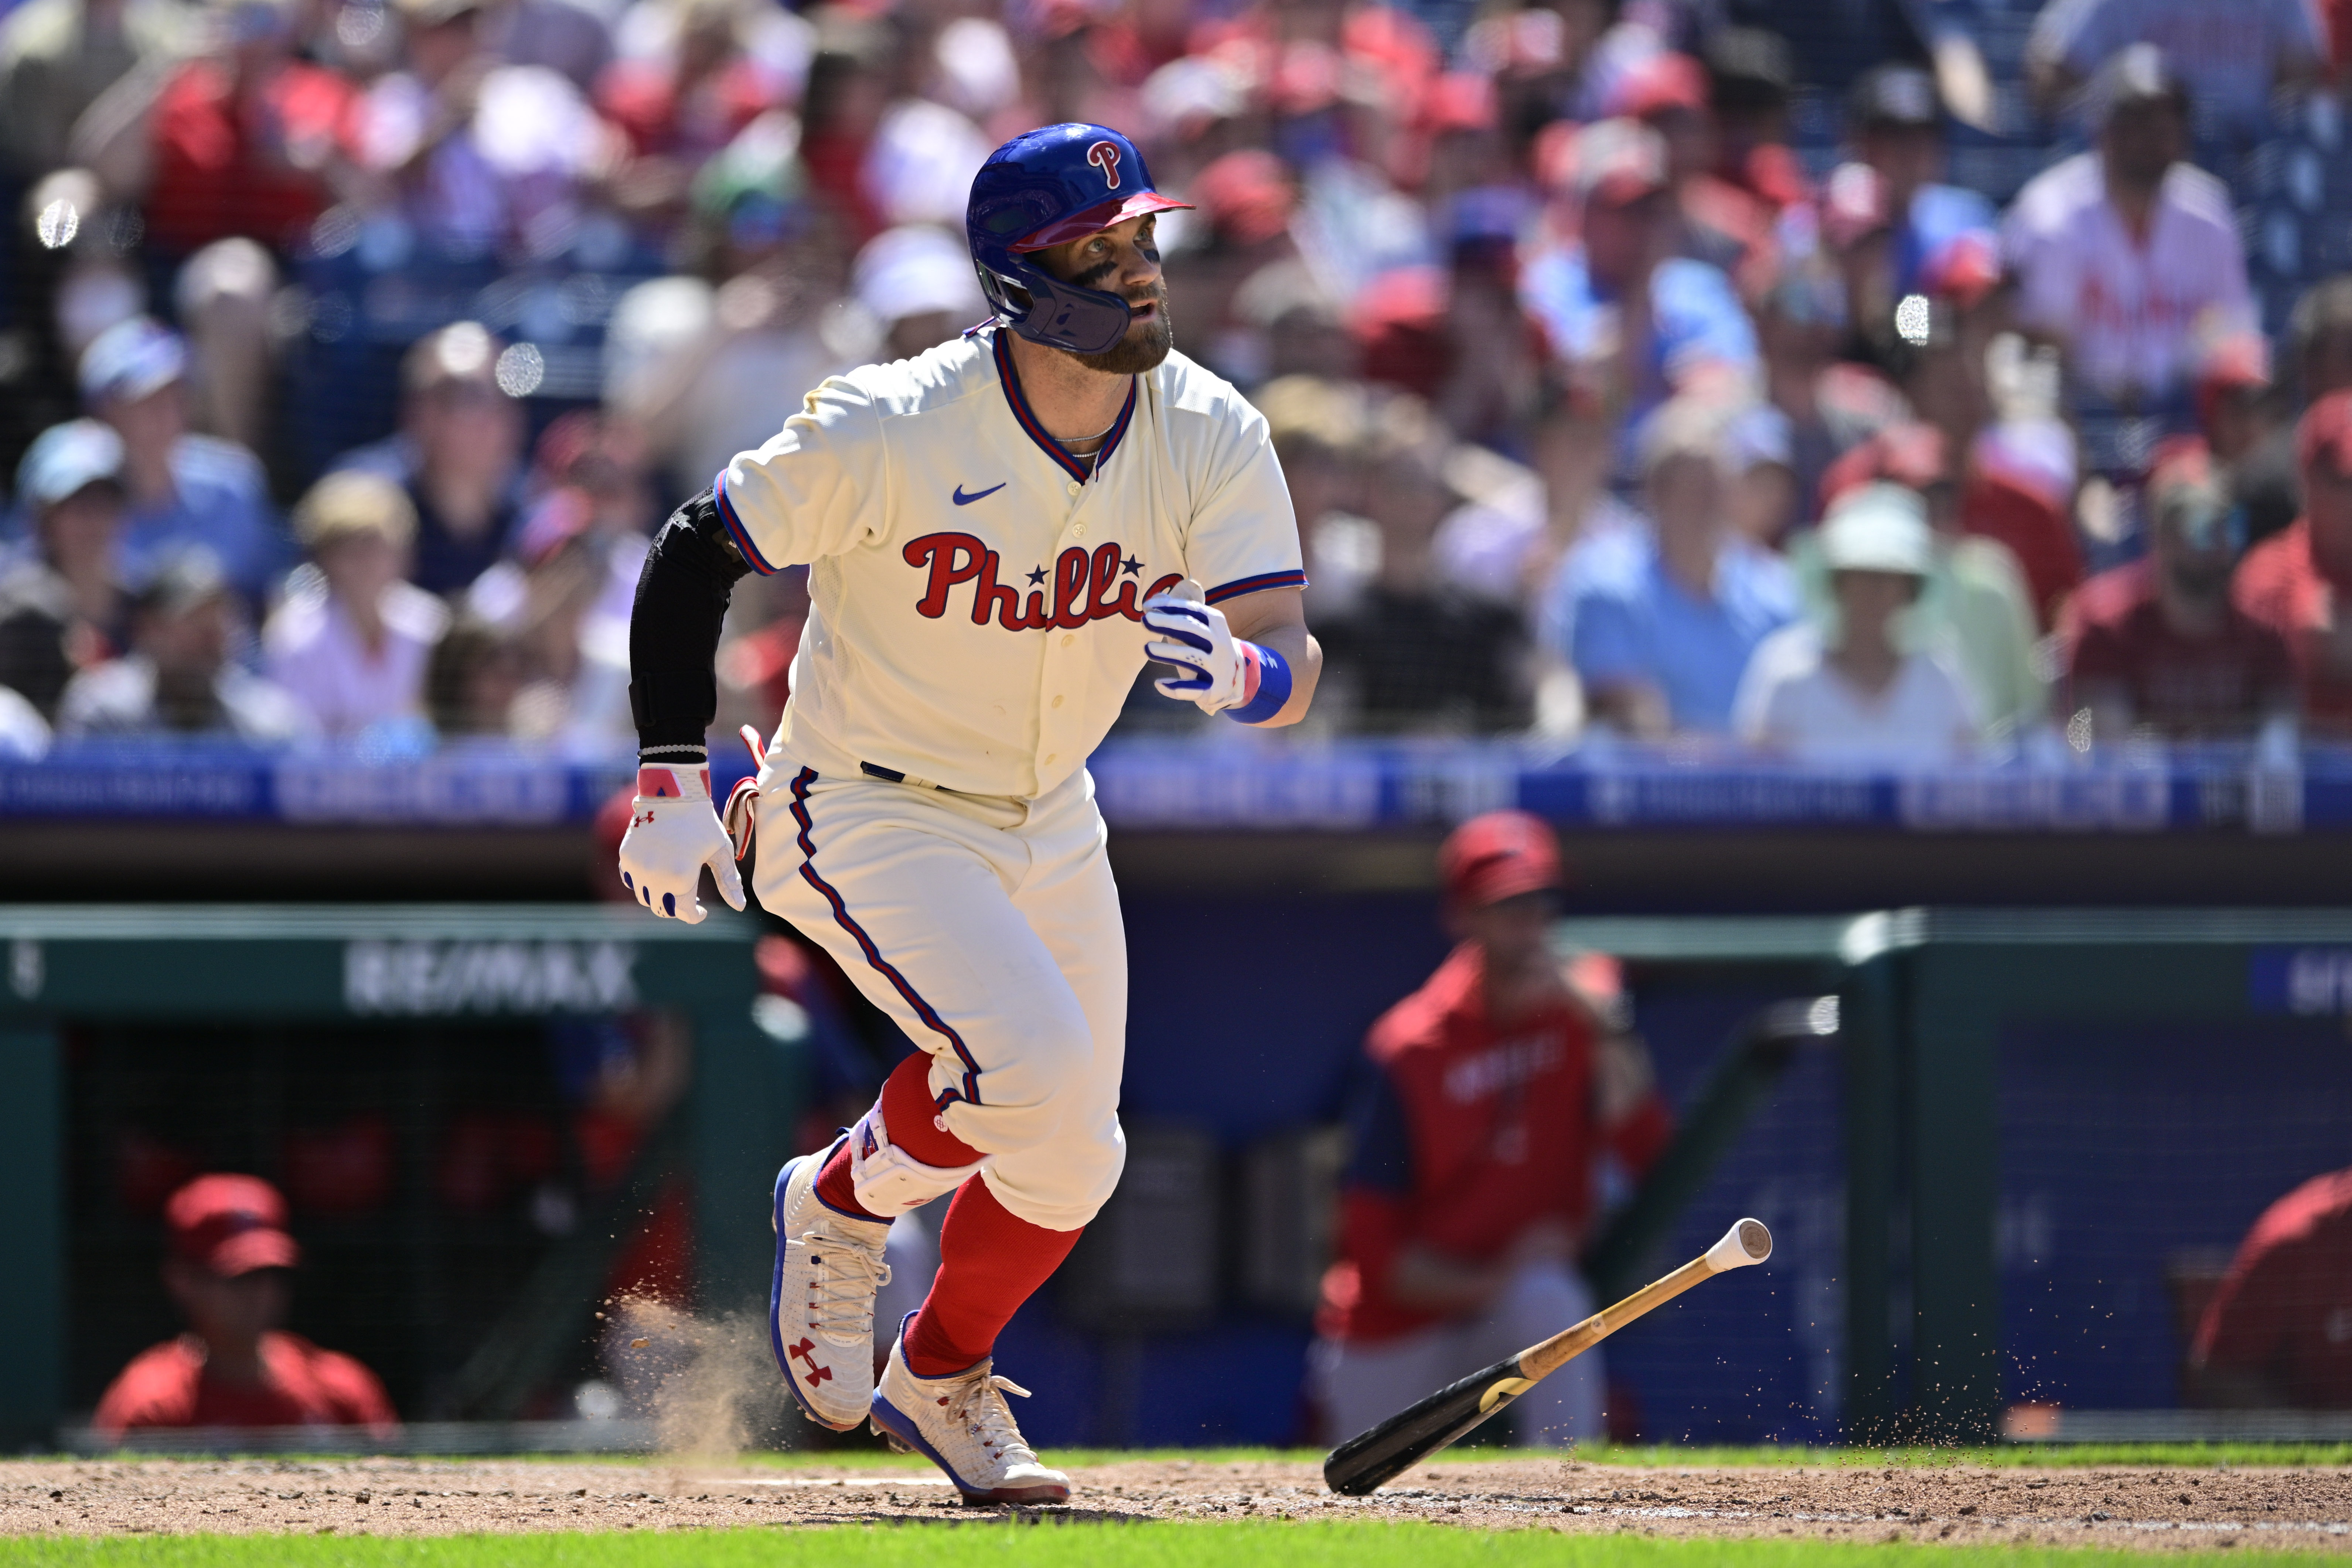 Harper sparks Phillies rally for 9-7 win over Angels